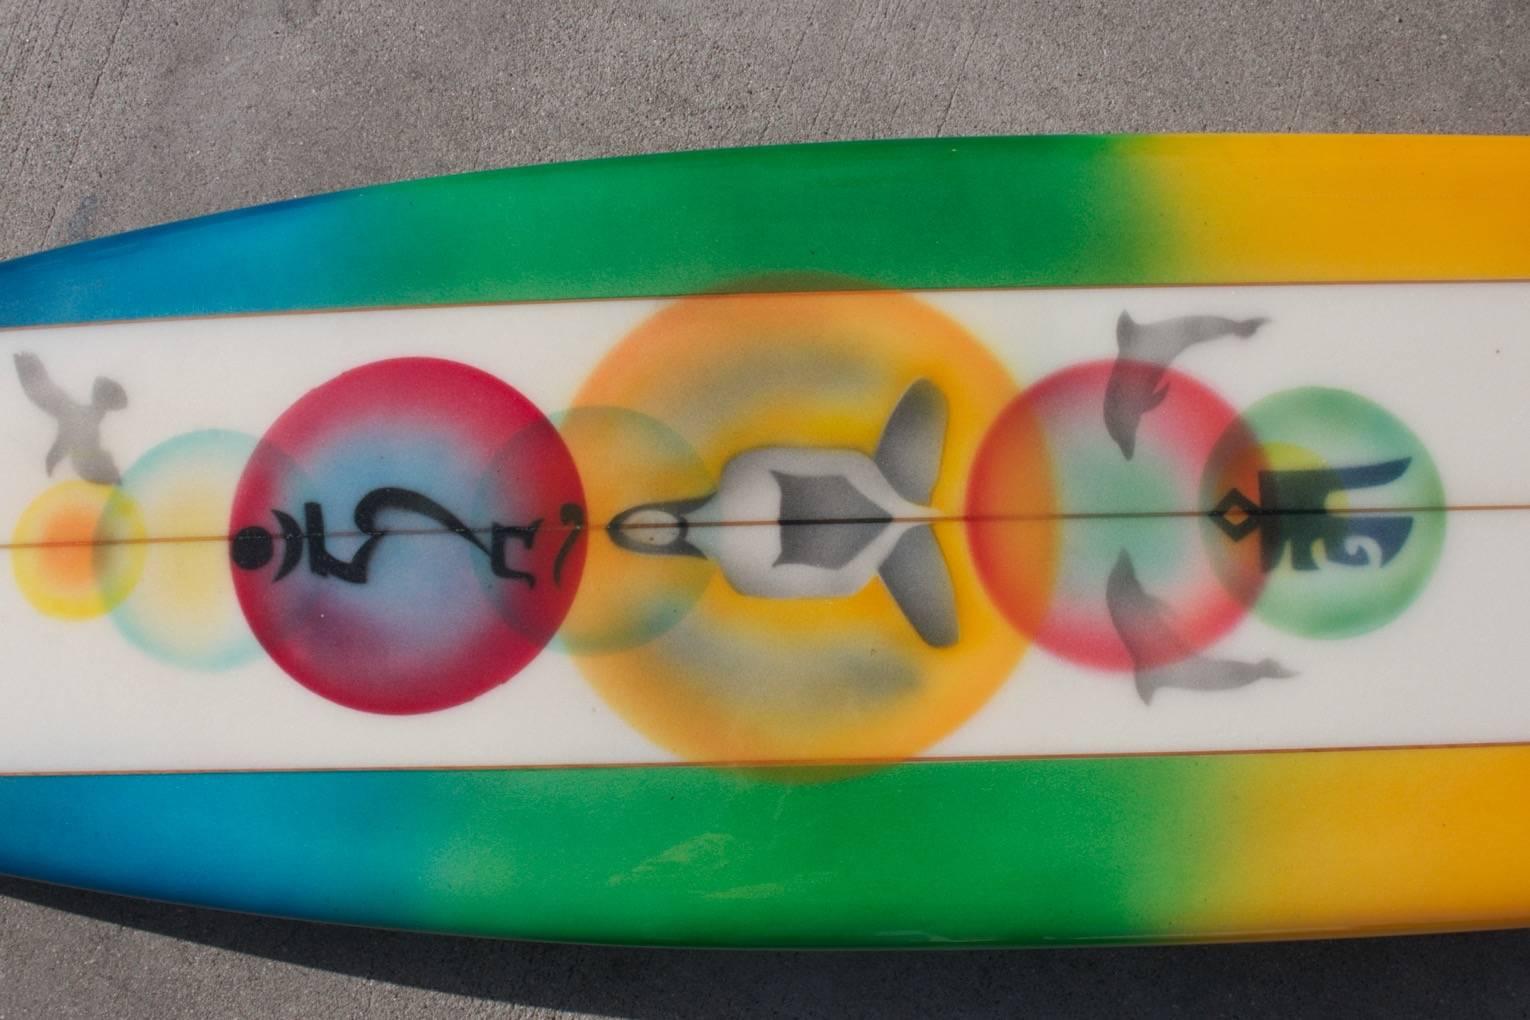 Mike Hynson Hand Shaped Rainbow, Big Wave Gun Surfboard, Artwork by Eilers, New In Excellent Condition For Sale In Los Angeles, CA